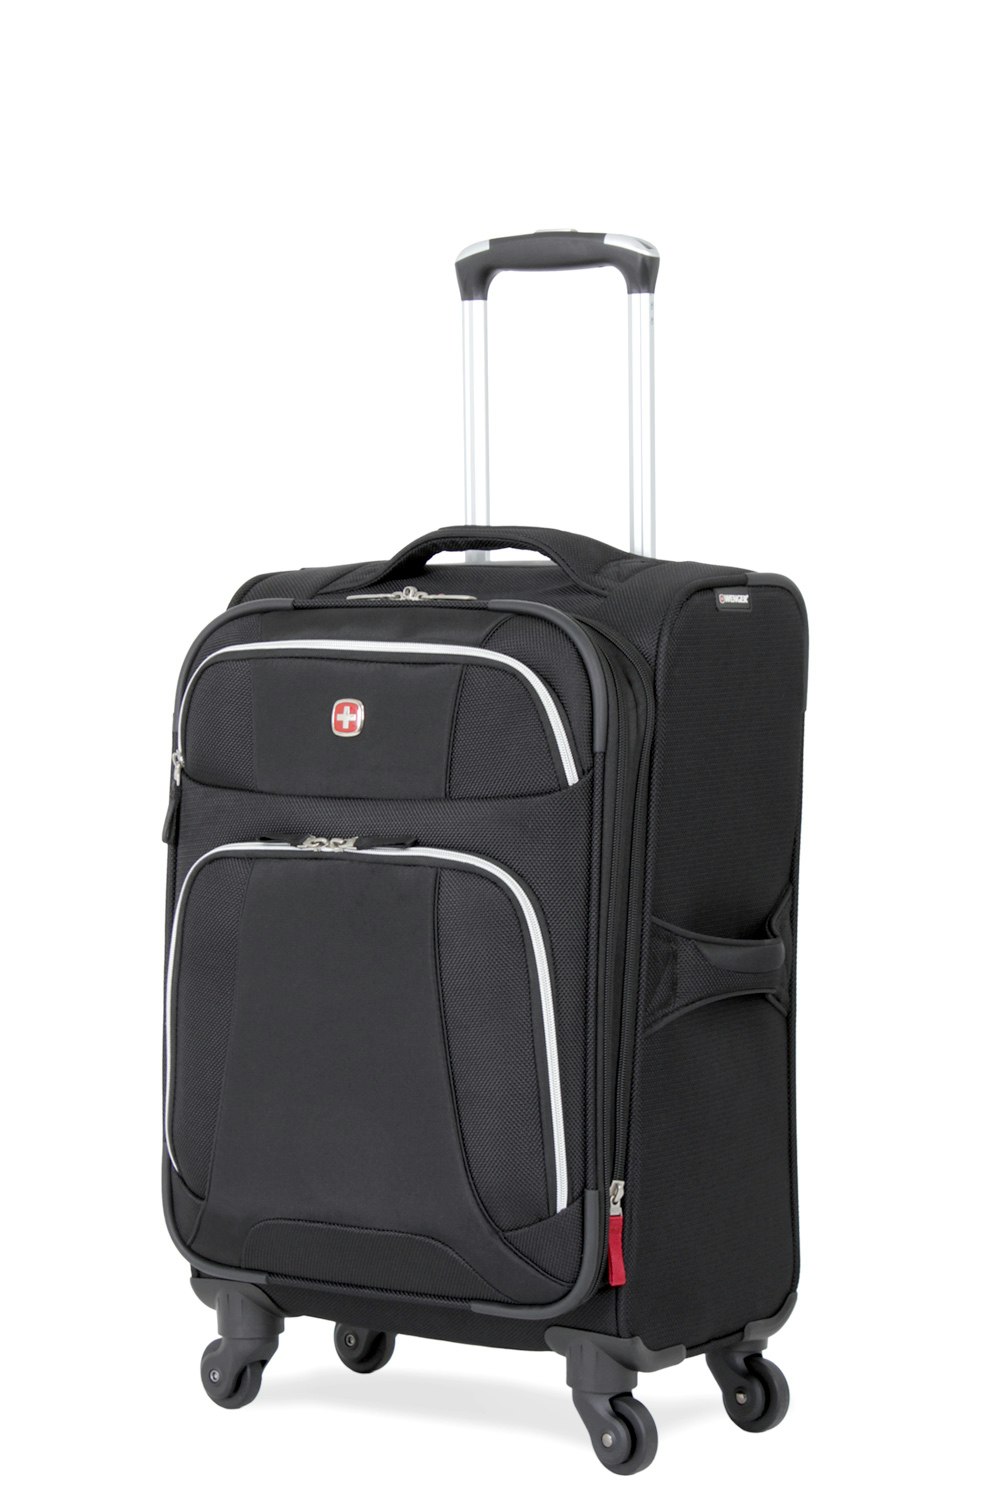 Swissgear 6270 19 Expandable Liteweight Carry On Spinner Luggage Pewter 